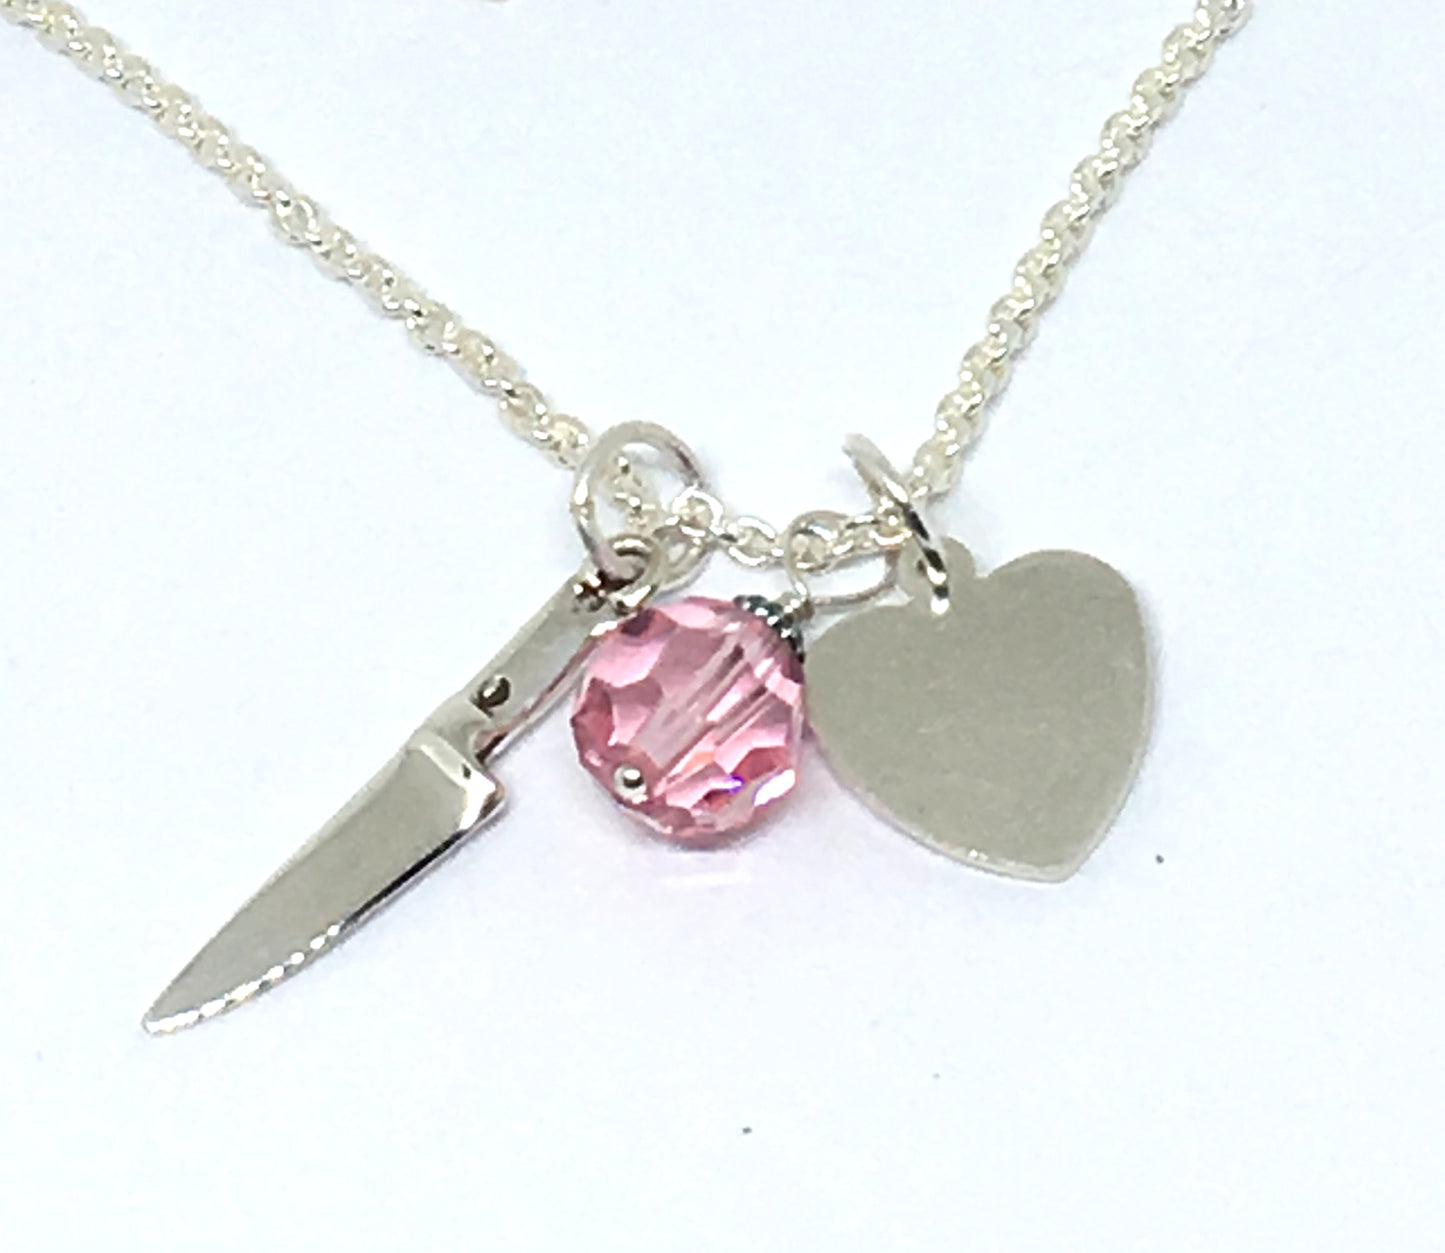 Personalized Chef Knife Cluster Necklace with Initials and Pink Swarovski Crystal